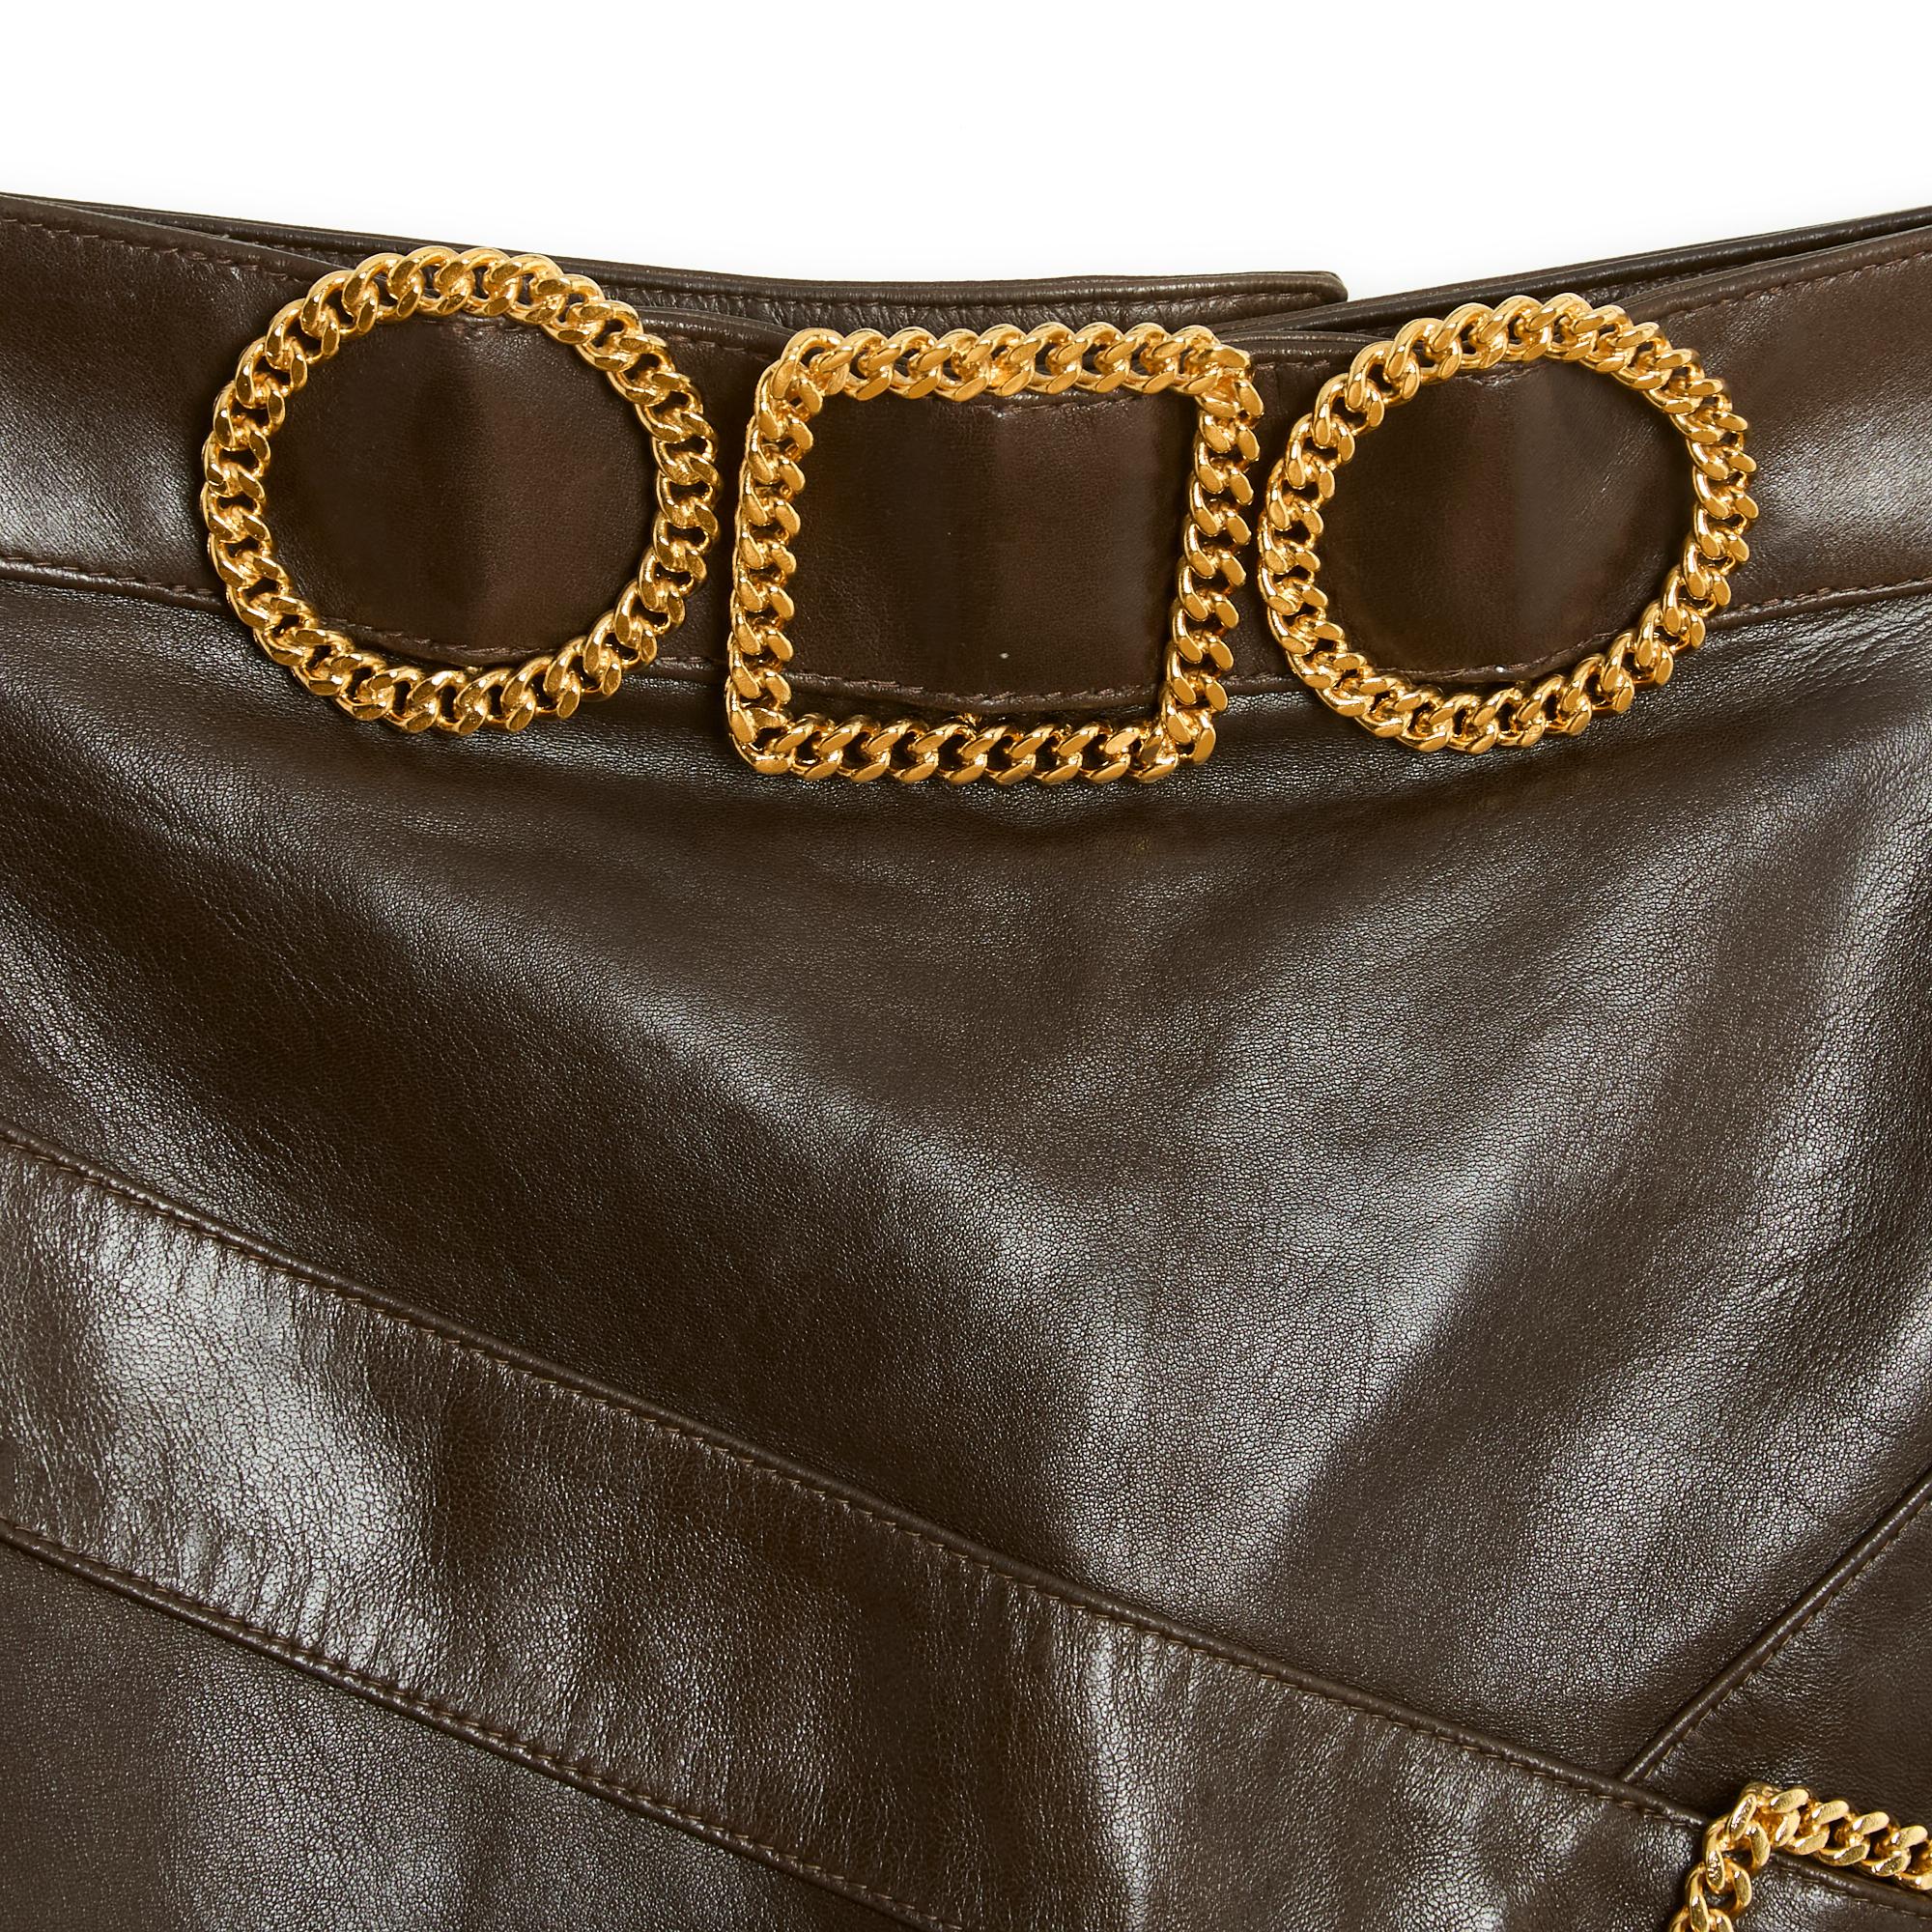 Chanel circa 1990 straight skirt in ultra soft dark brown leather with striped leather inserts decorated with gold metal chain belt buckles, matching CC logo silk lining, zip and button closure in the back. No more size label but the measurements